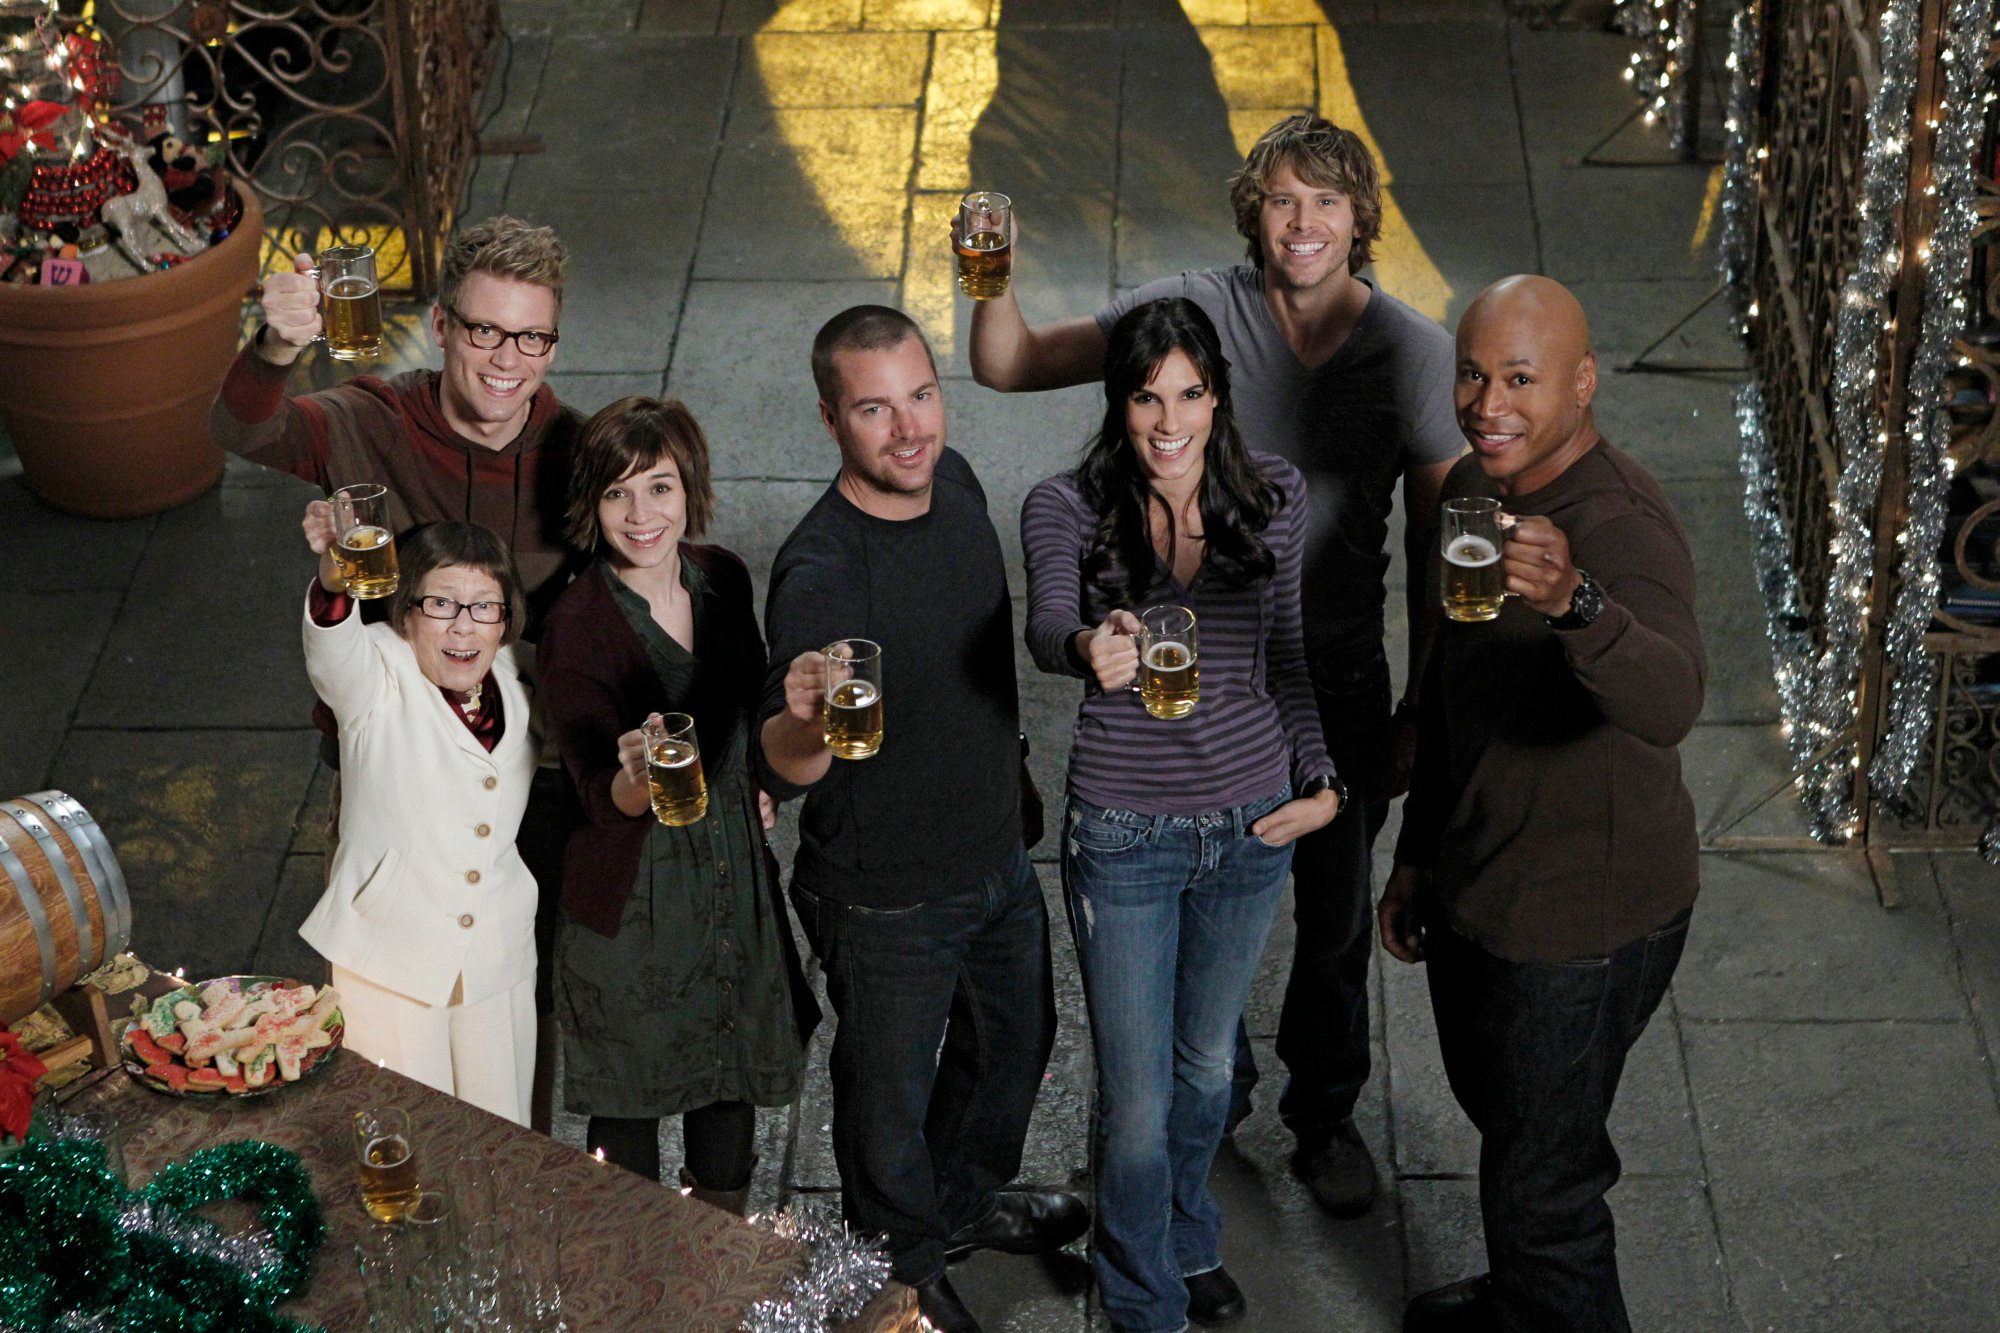 The NCIS Los Angeles cast raises glasses of beer while standing inside the NCIS LA set. 